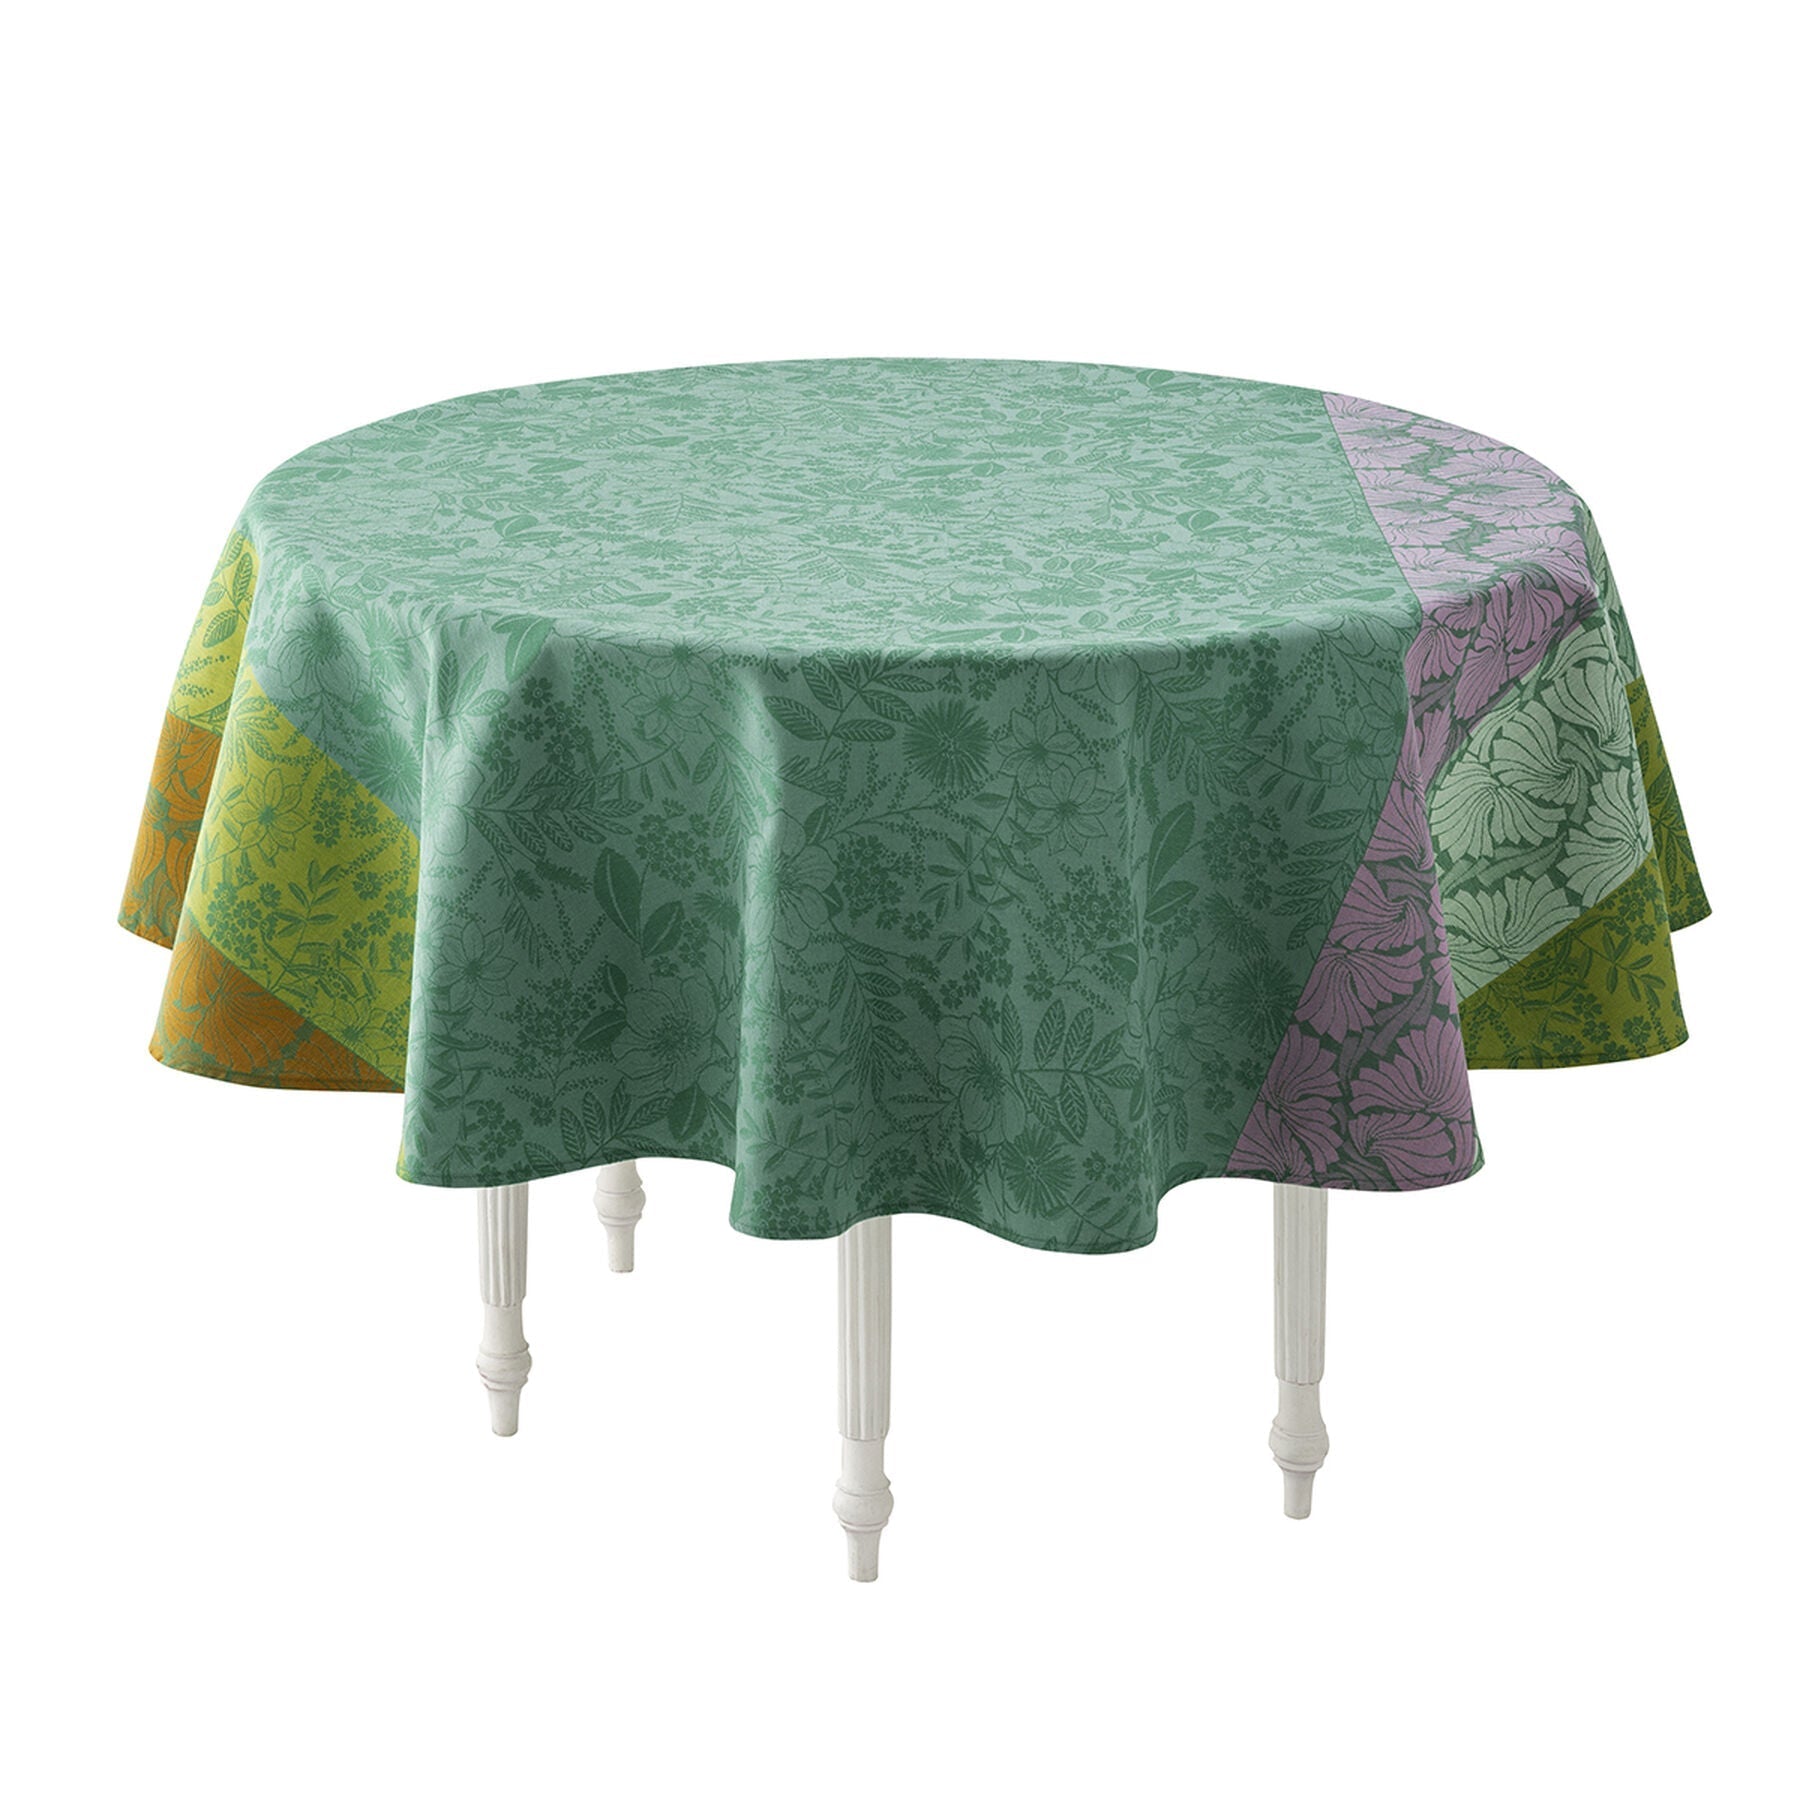 Cottage Coated Table Linens